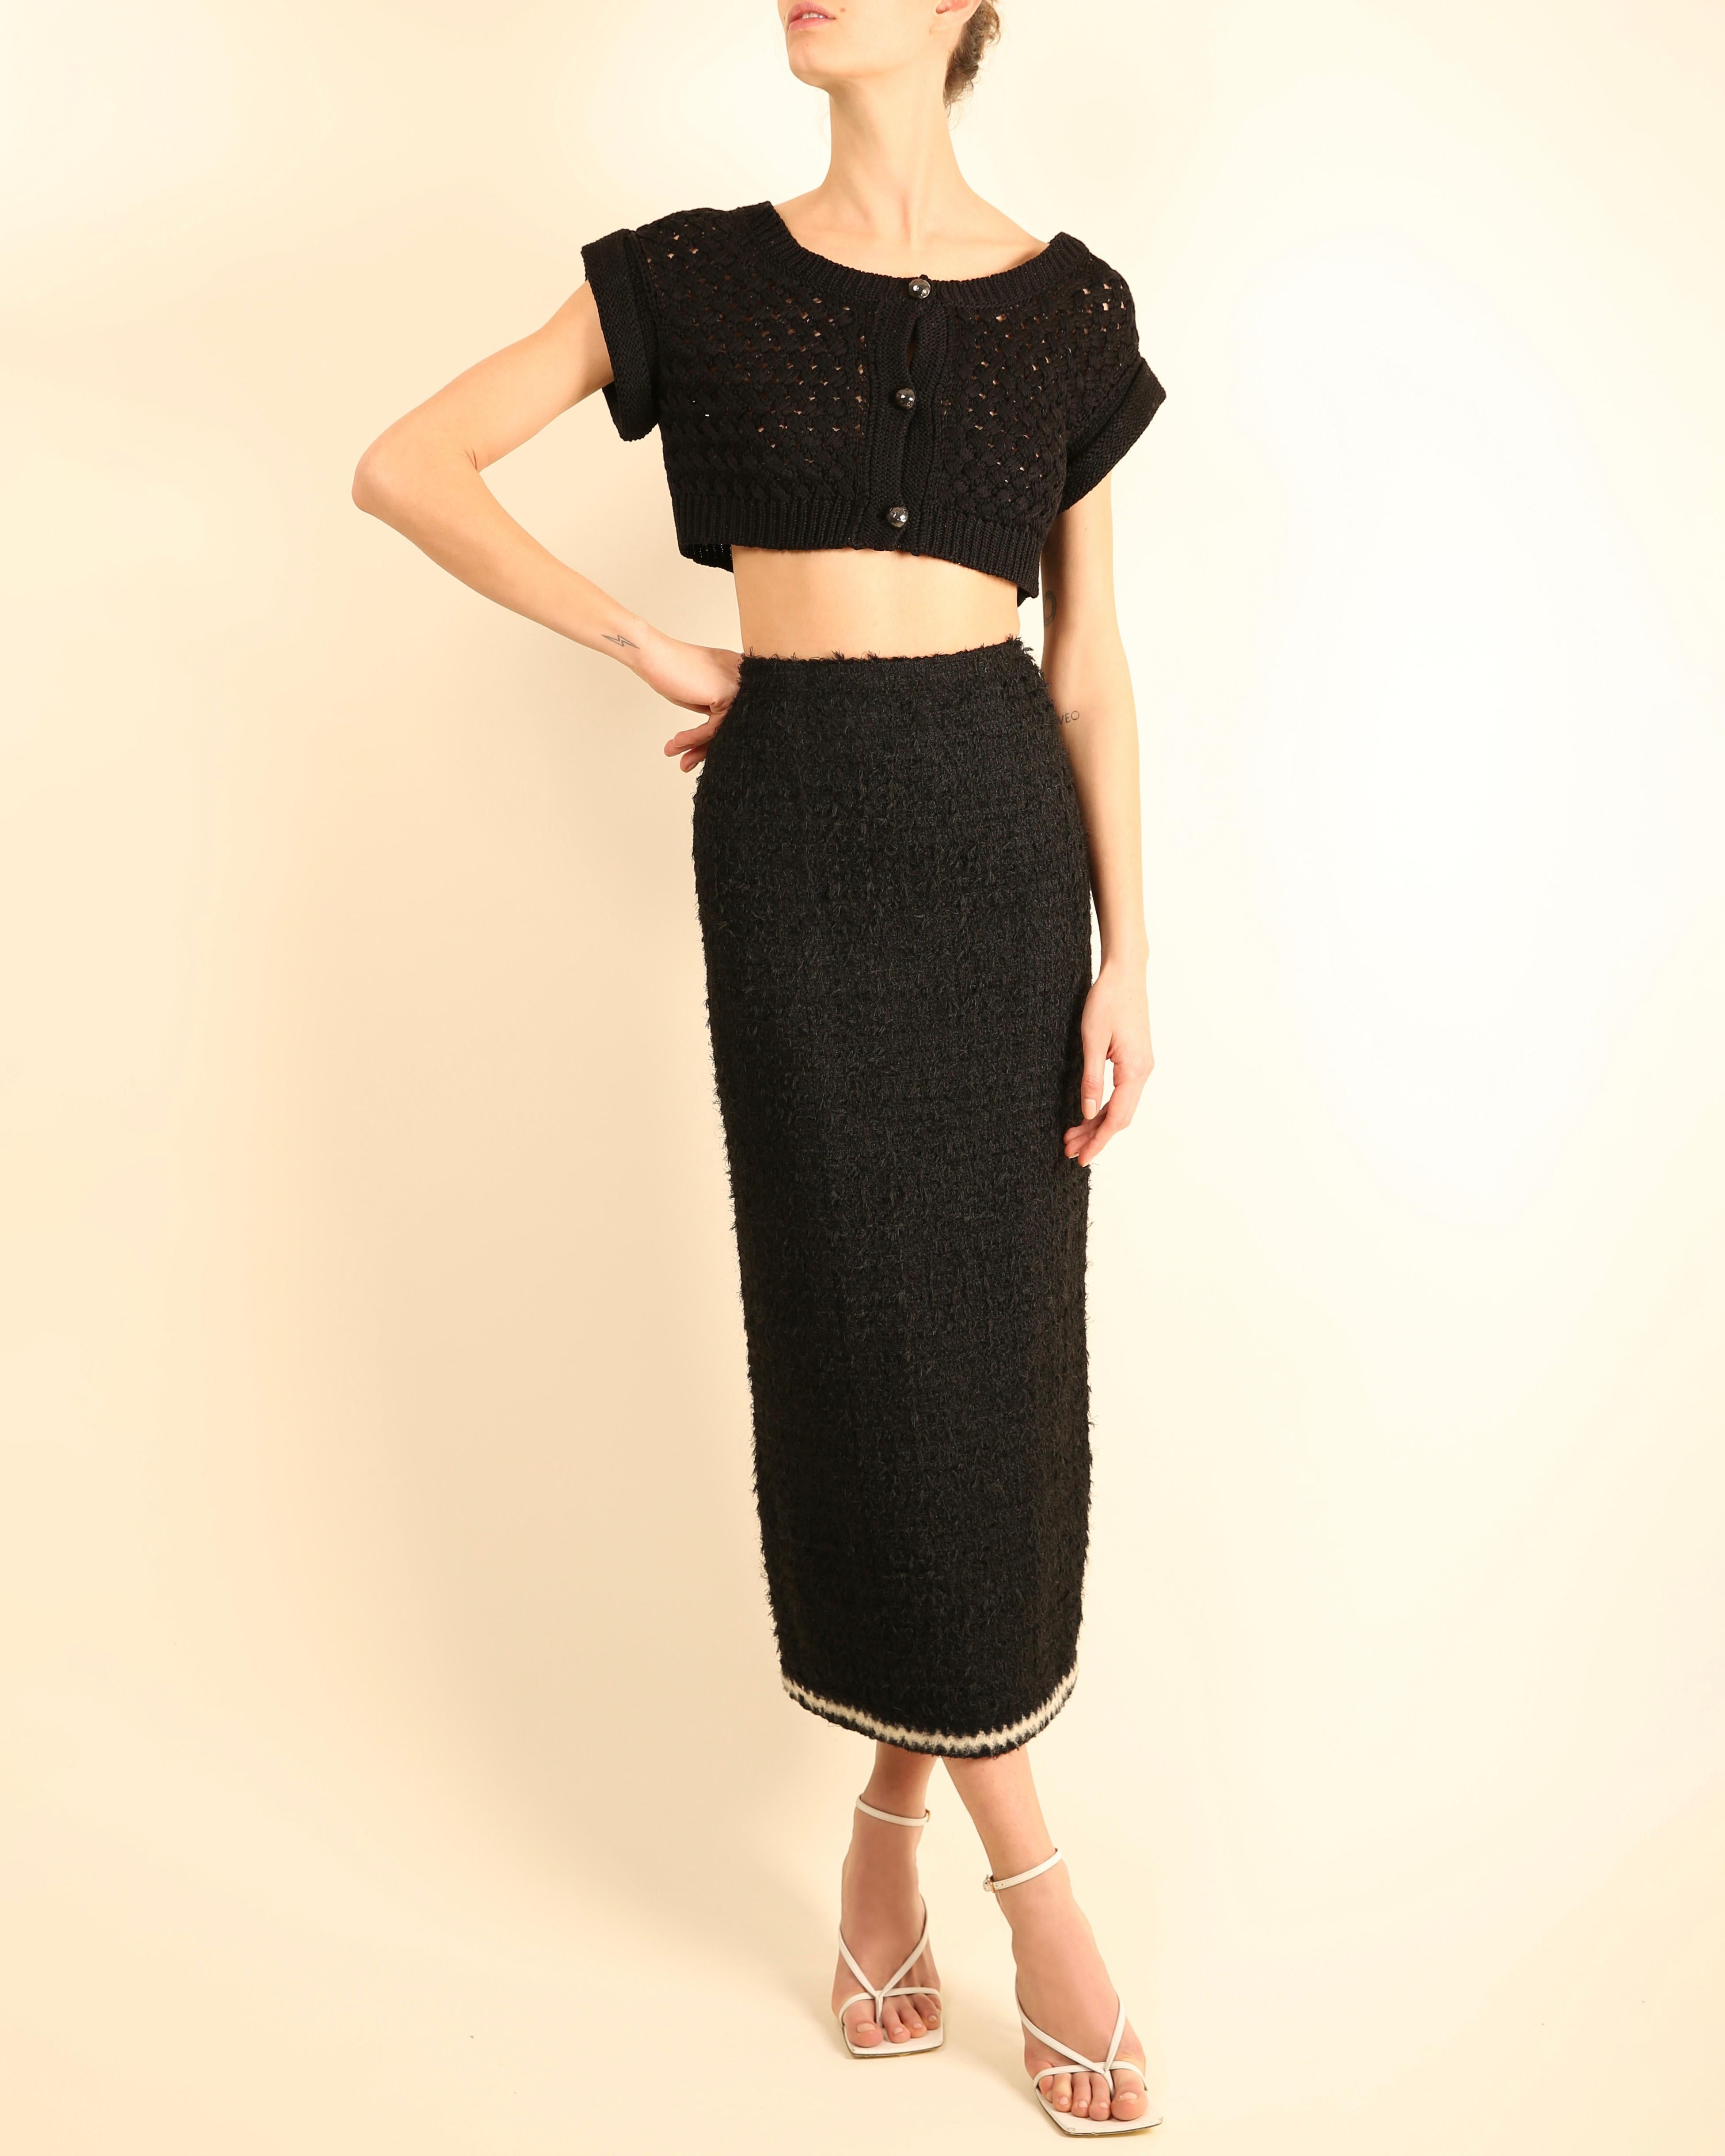 LOVE LAI VINTAGE

Chanel 1998 (98 A) black boucle skirt
High waisted fit
Straight cut
Maxi length
White and black zig zag trim in a contrasting fabric
The skirt has a vent to the back that can be closed via 4 buttons all with the Chanel CC
Concealed